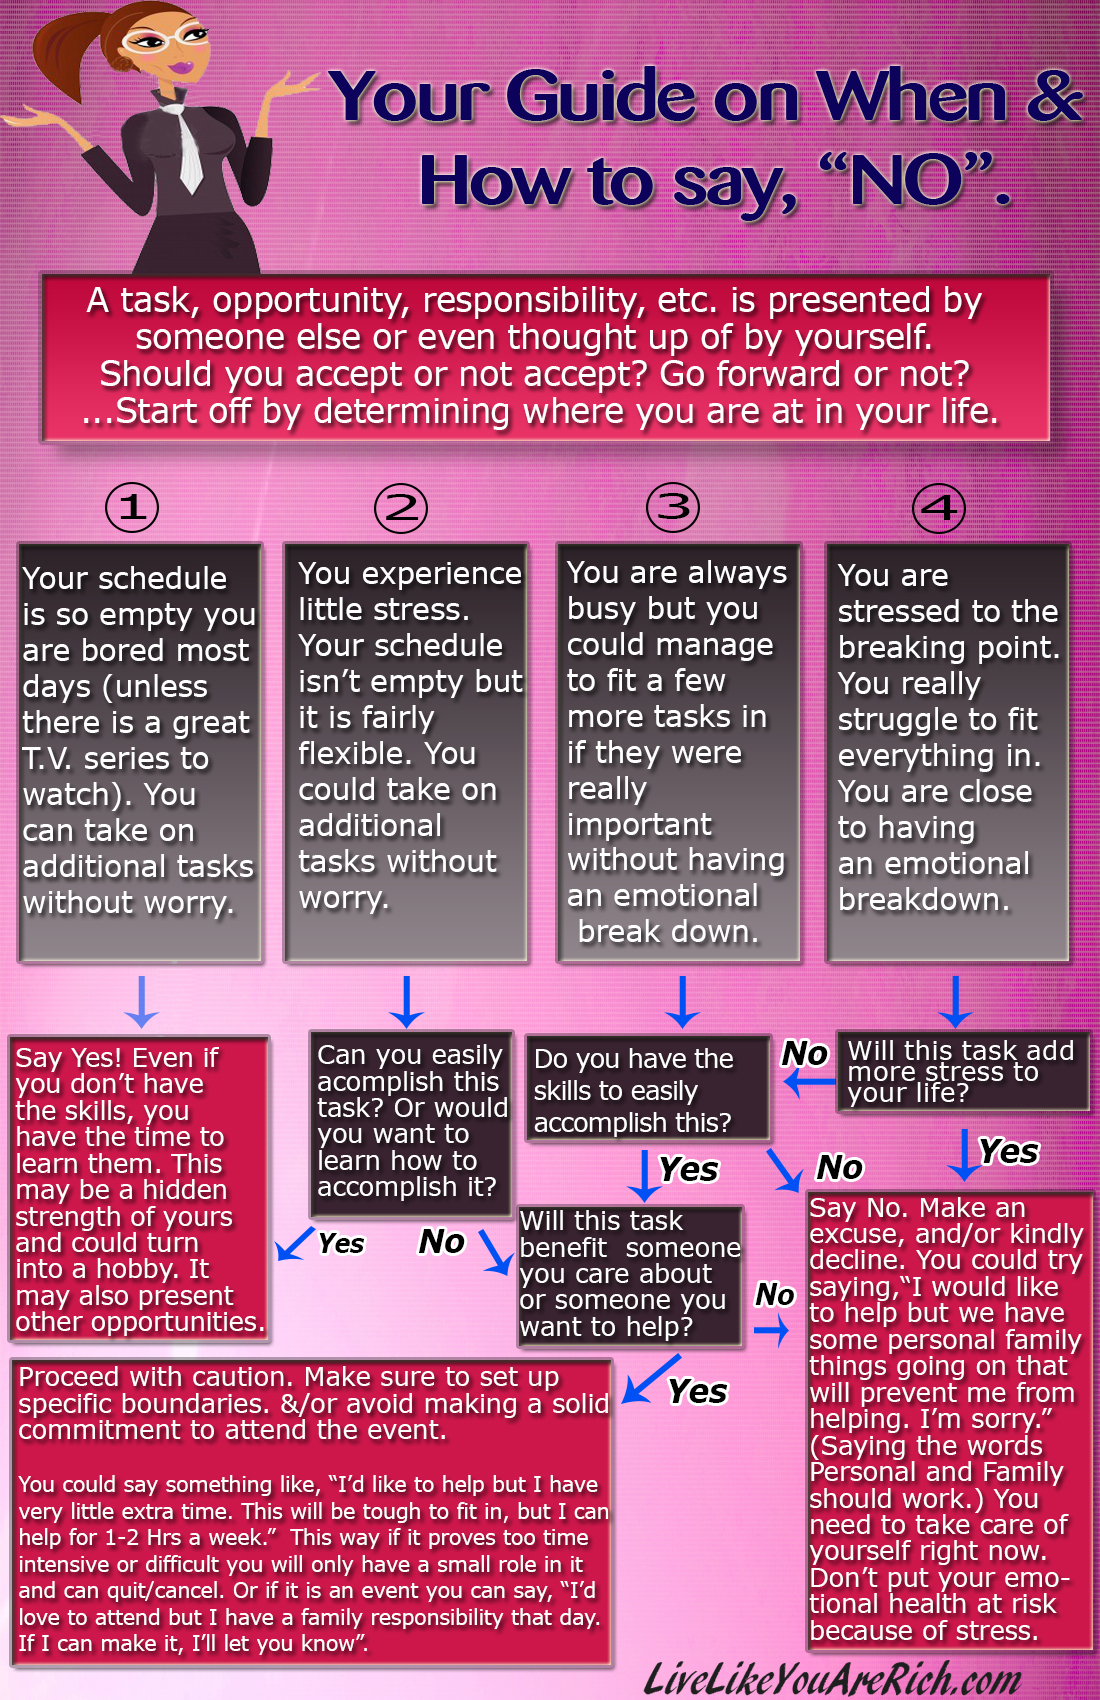 Your Guide on When and How to Say, "No"